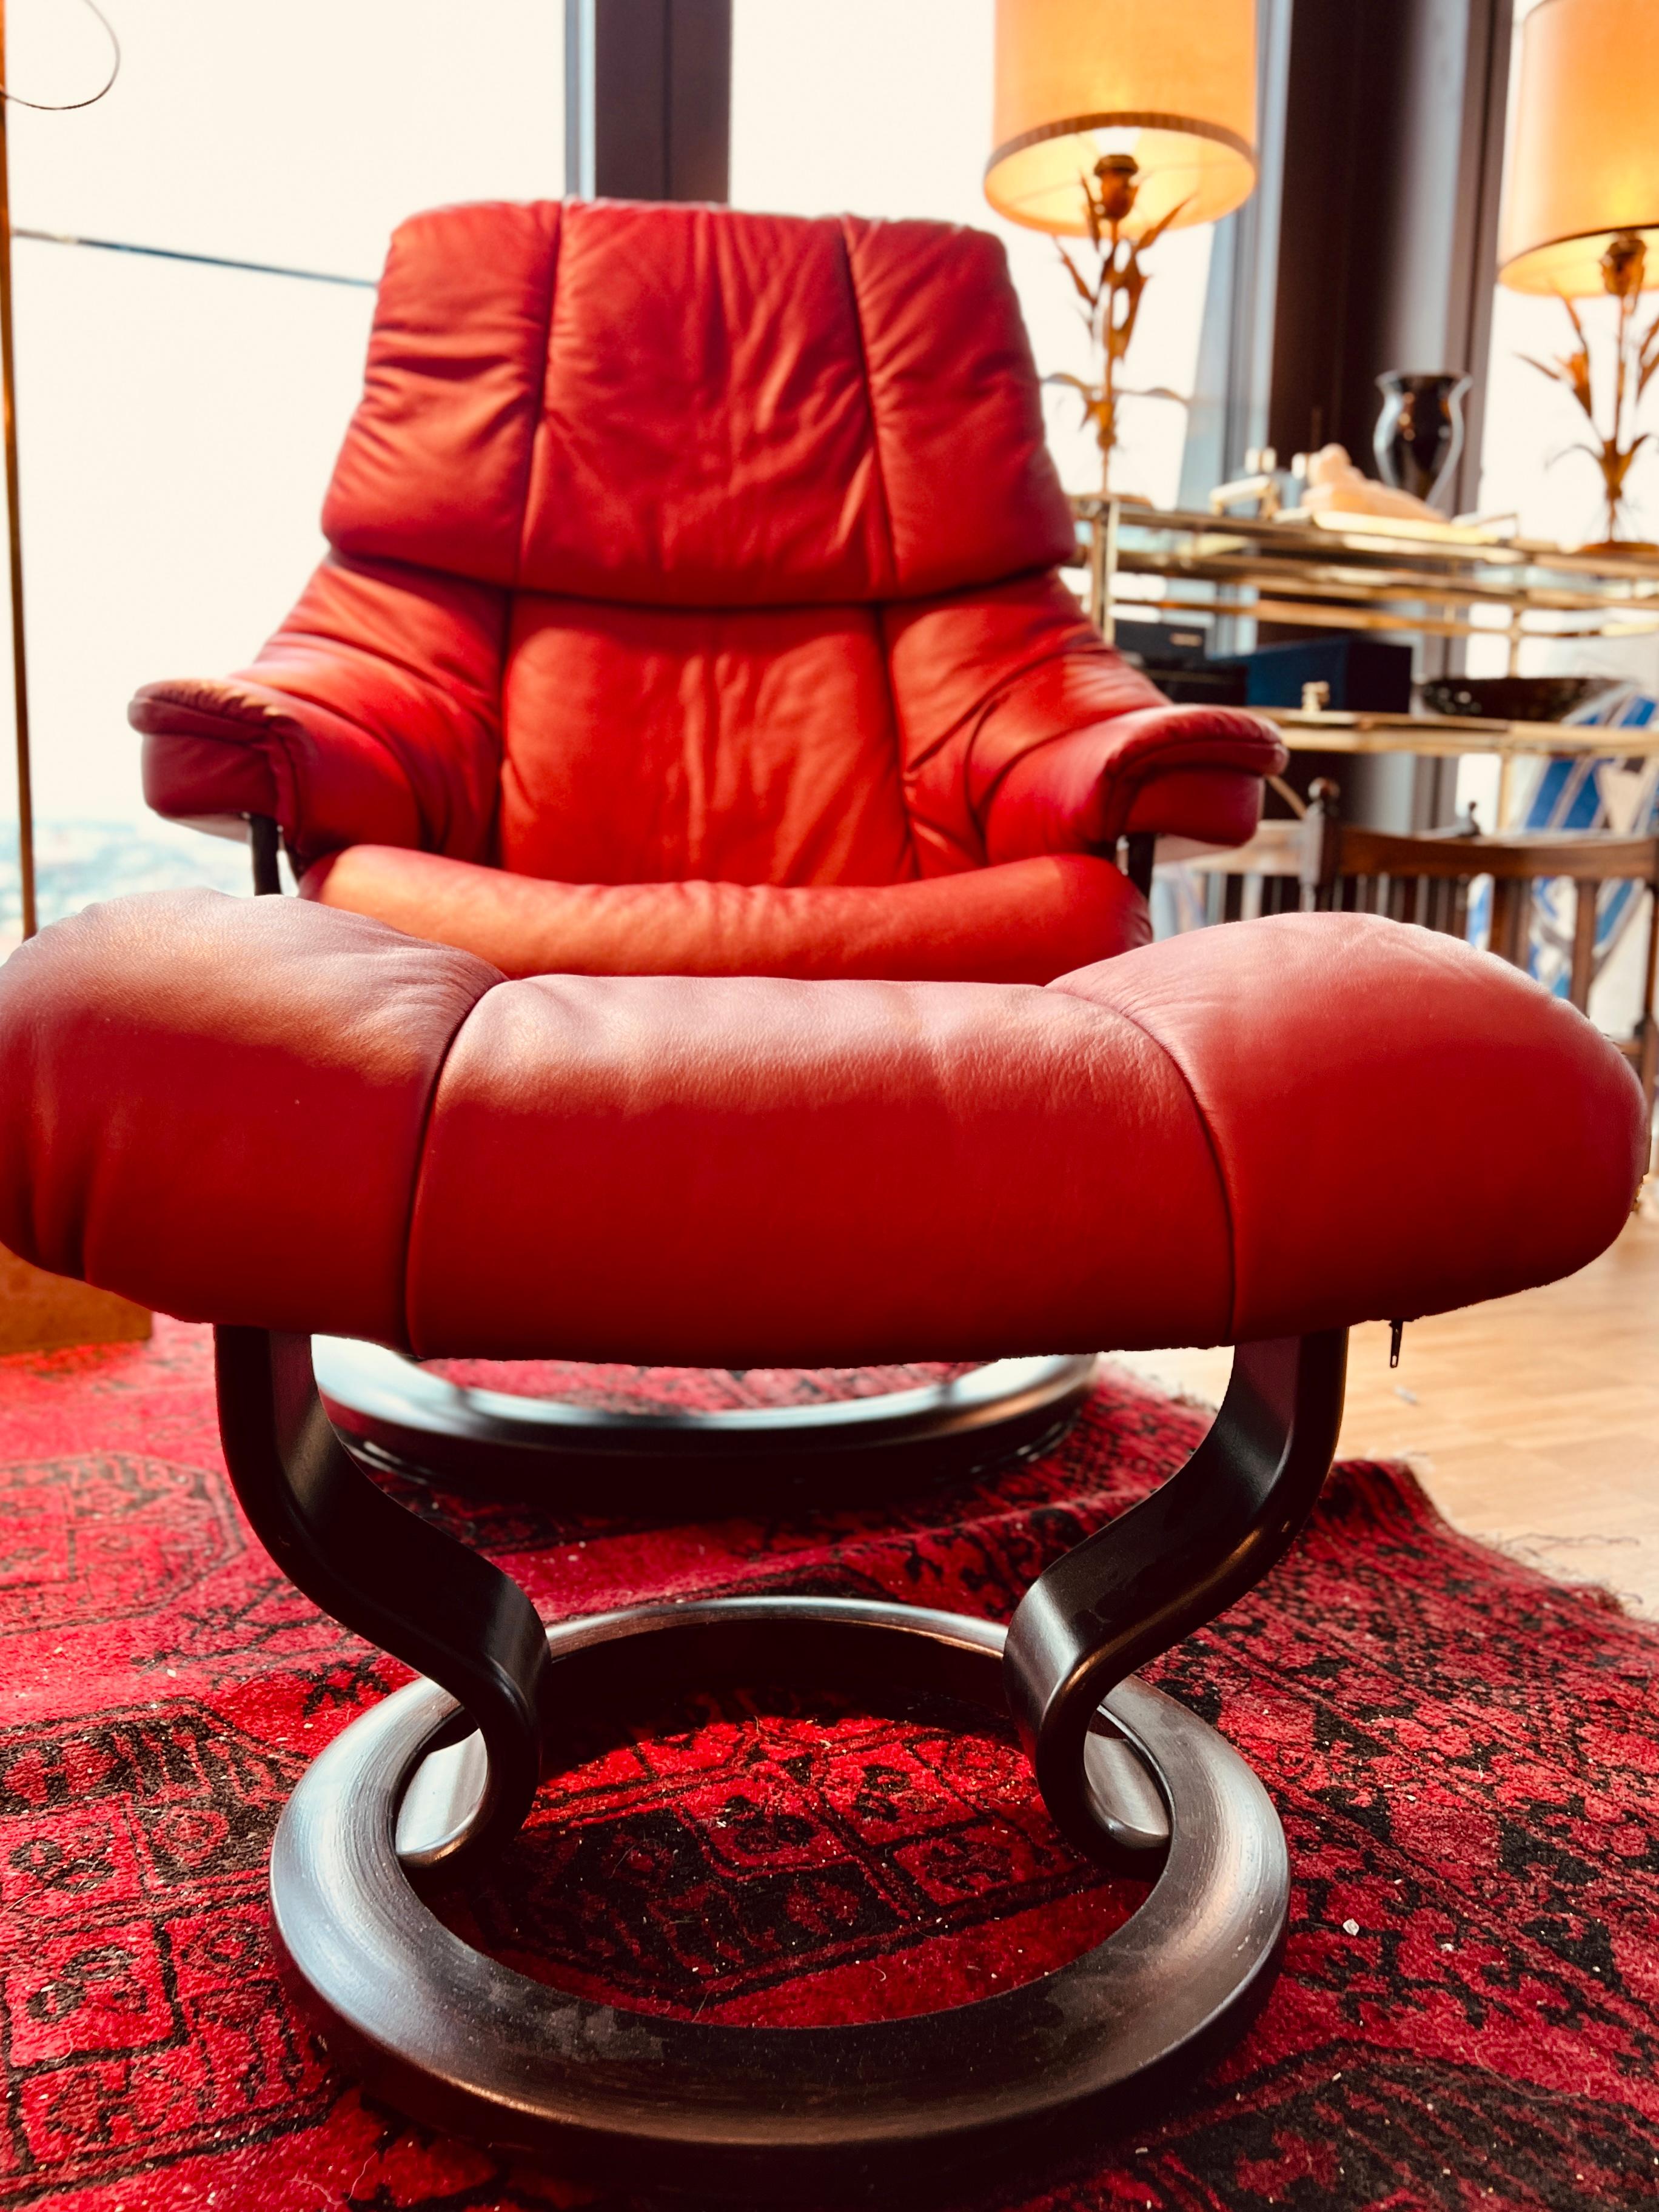 20th Century Burgundy Leather Stressless Recliner with Ottoman from Ekornes, Norway 1990